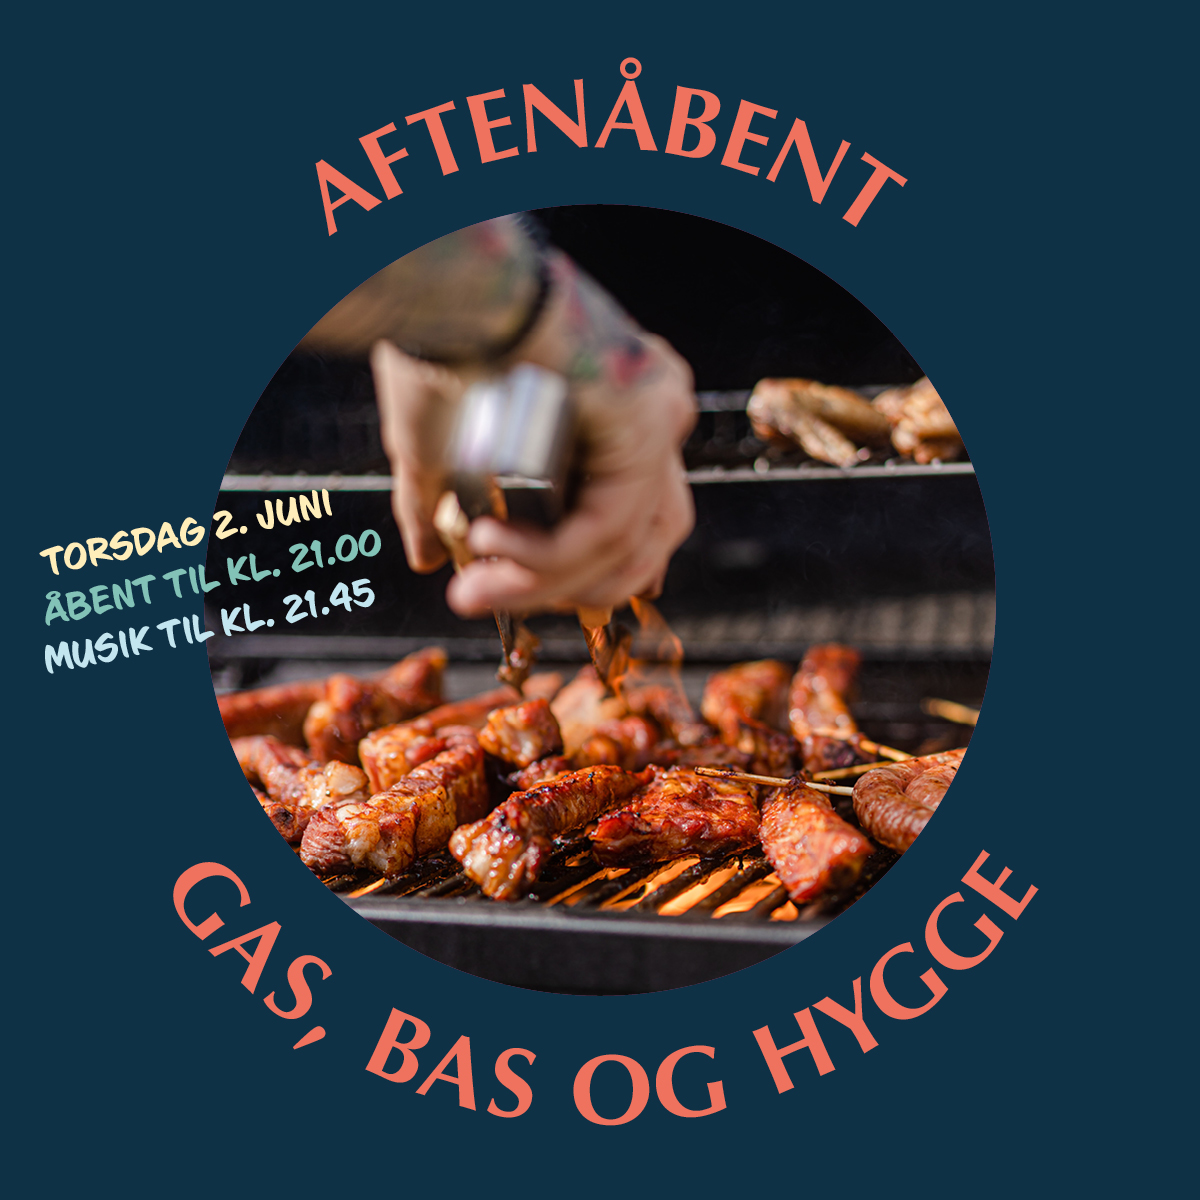 Aftenmad-FB-post06